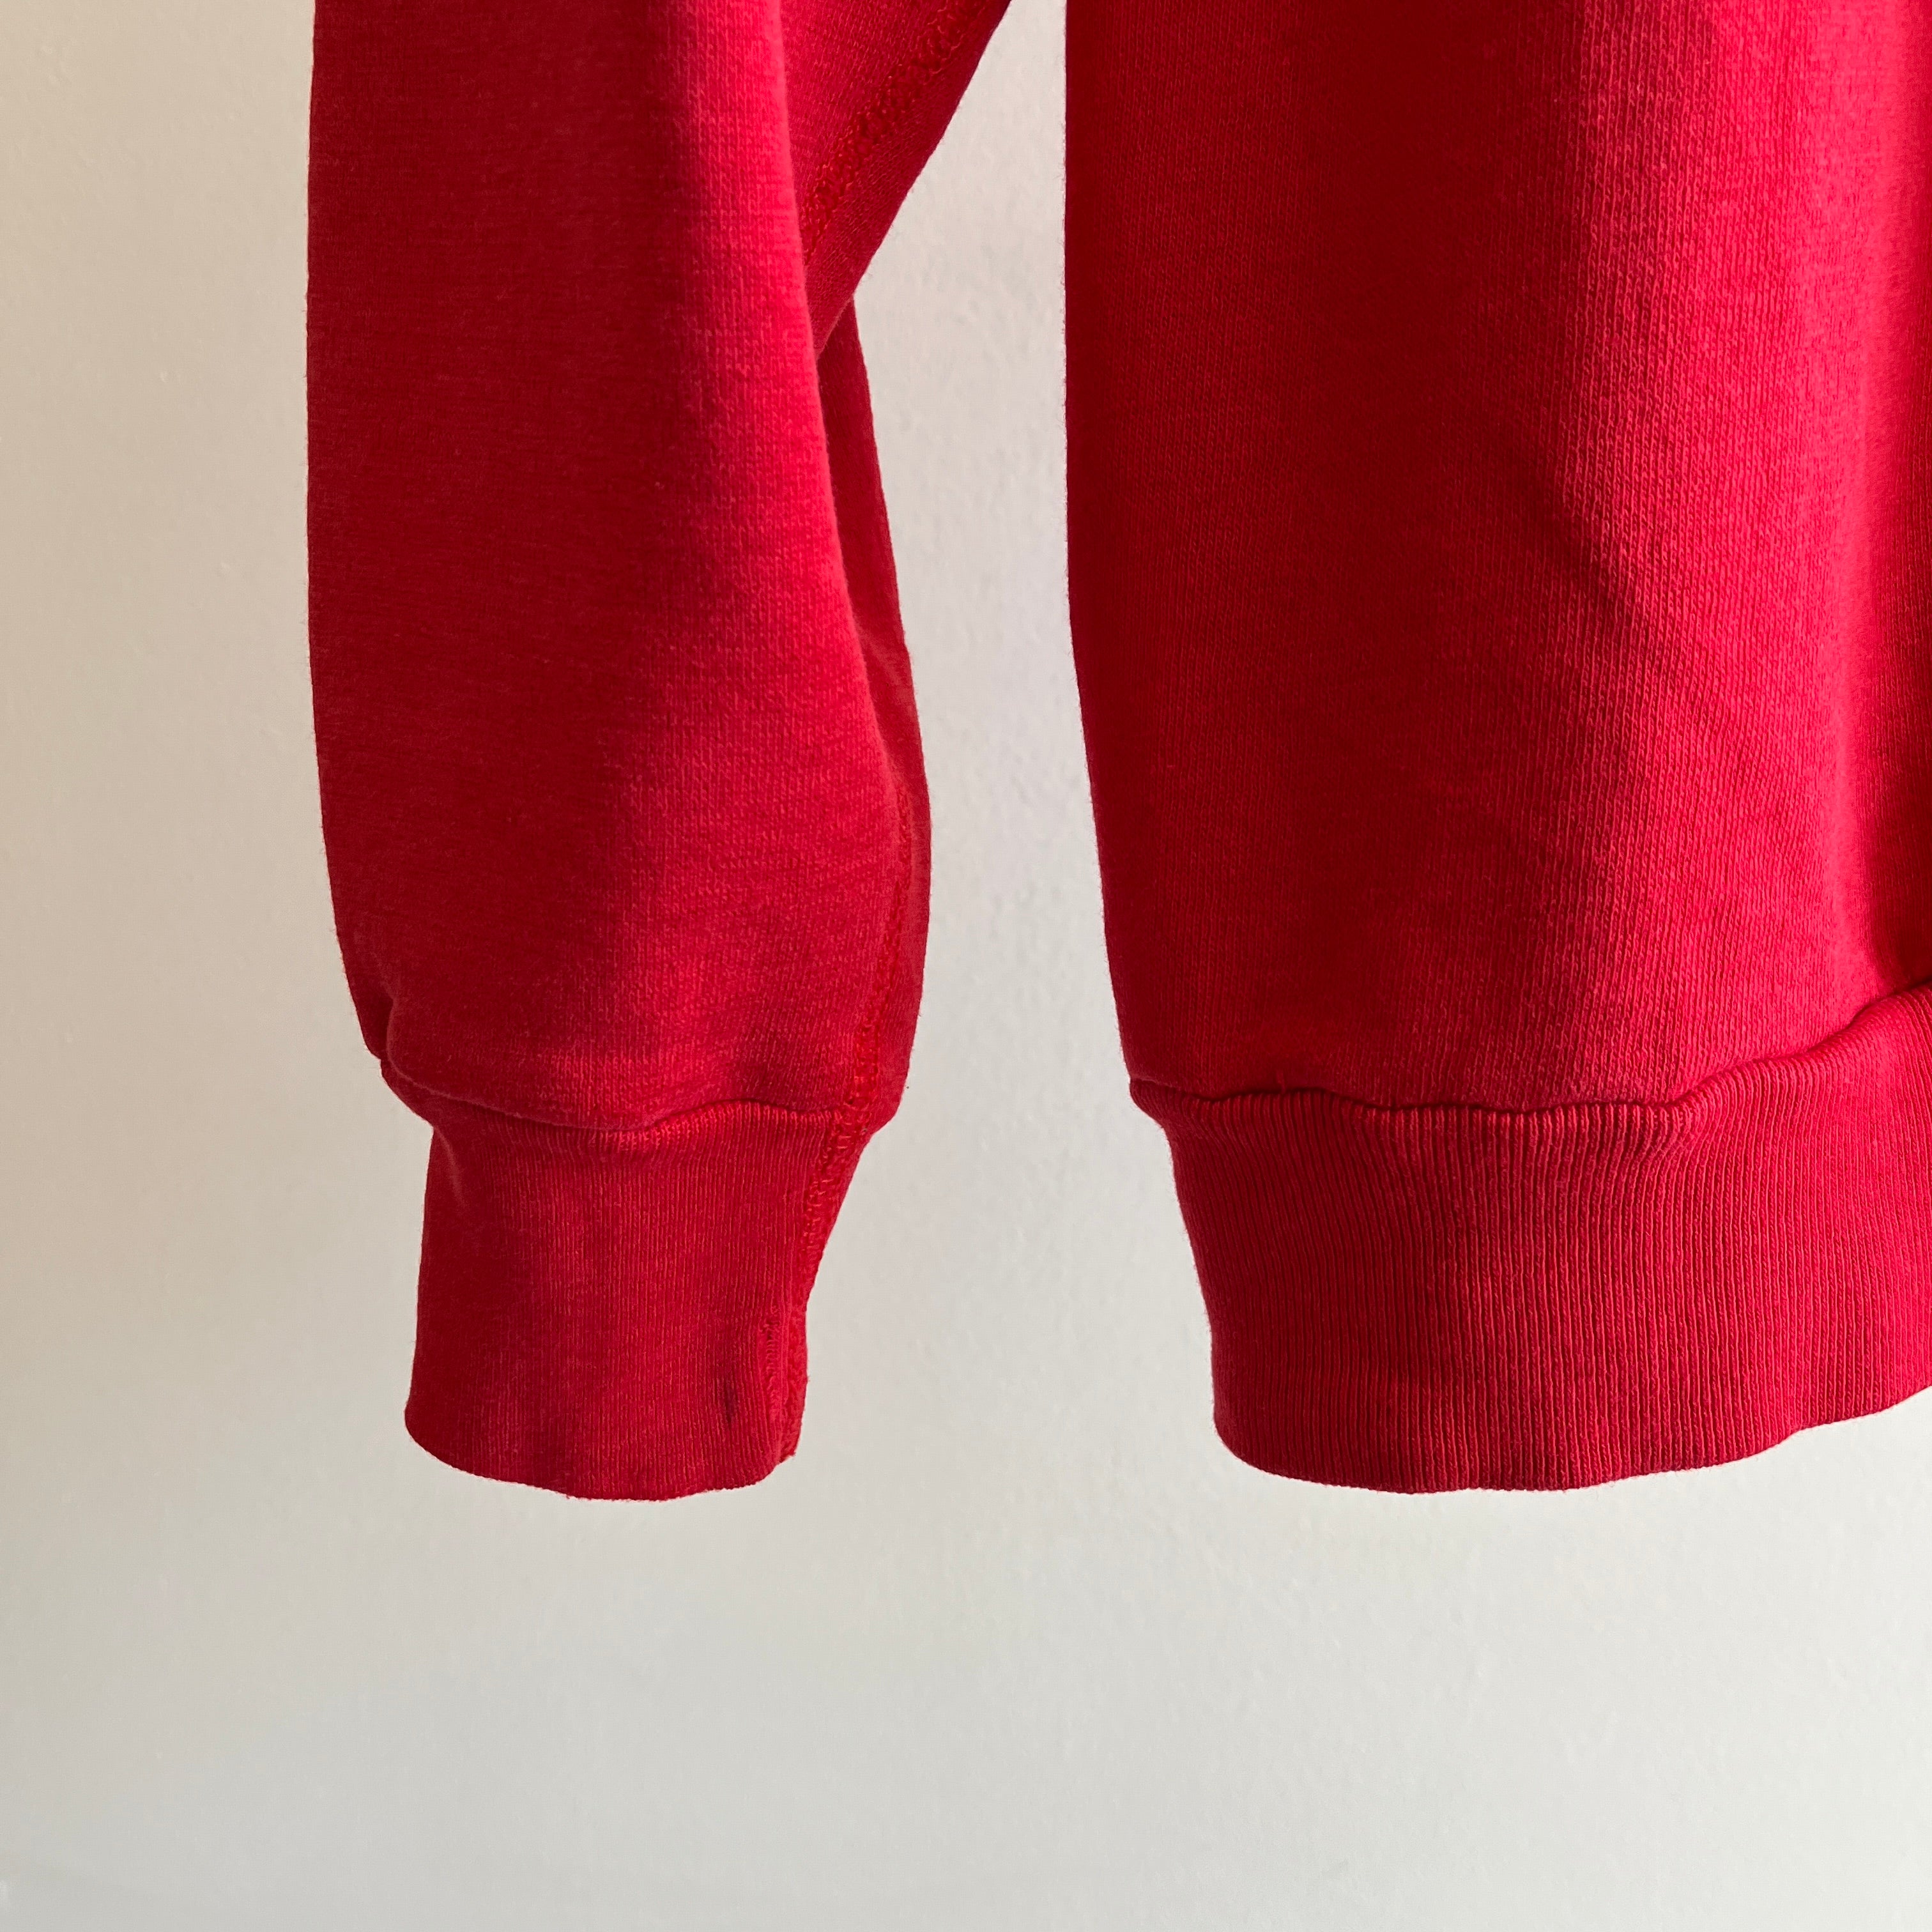 1980s Buttery Soft Arm Gusset Blank Red Sweatshirt - Better Than Your Average!